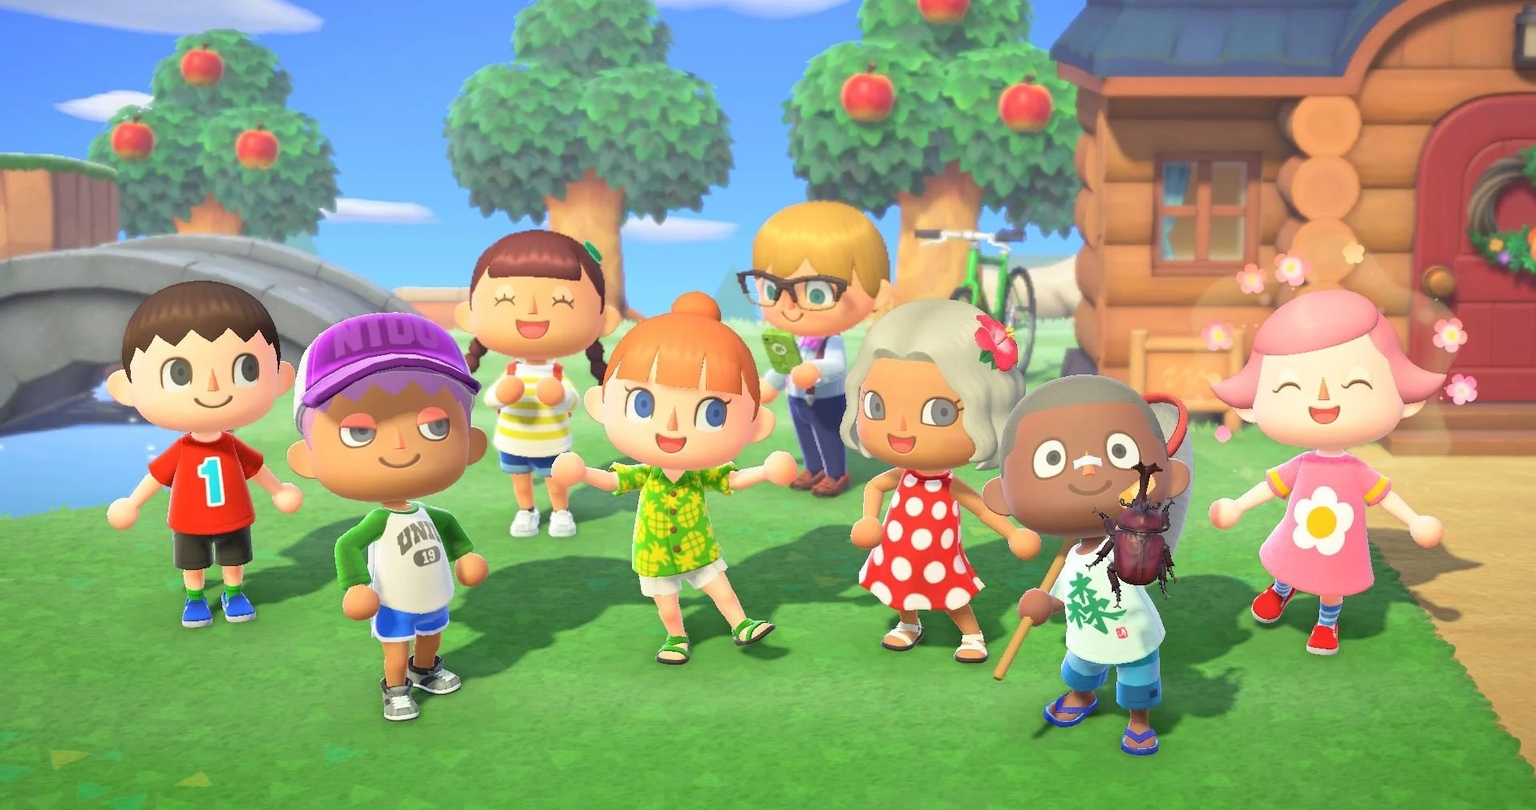 Download Or Share Custom Patterns With Nook Island – An Animal Crossing  Reference And Pattern Website | Happy Gamer